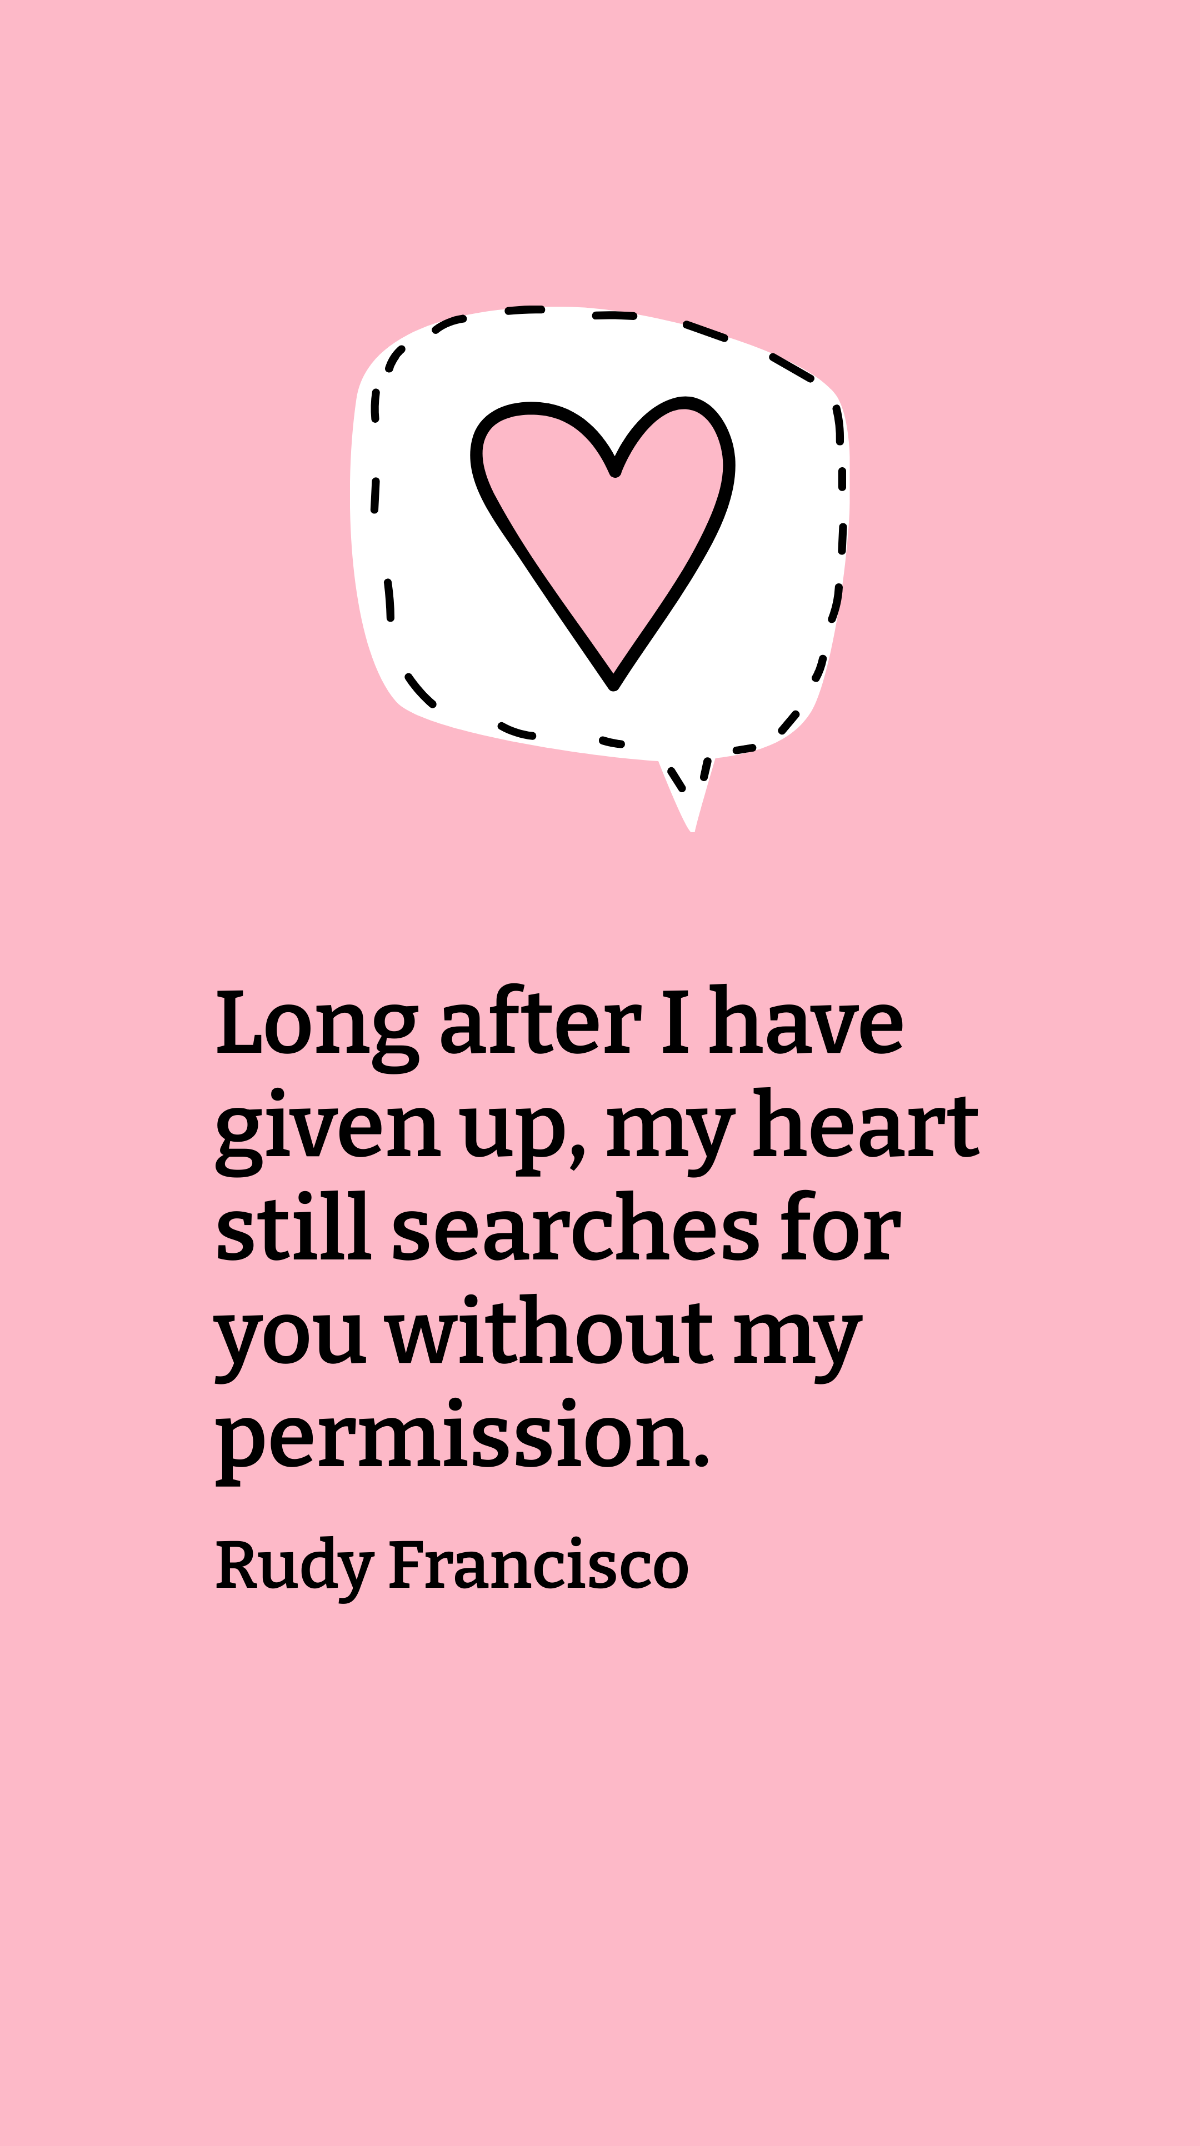 Rudy Francisco - Long after I have given up, my heart still searches for you without my permission.